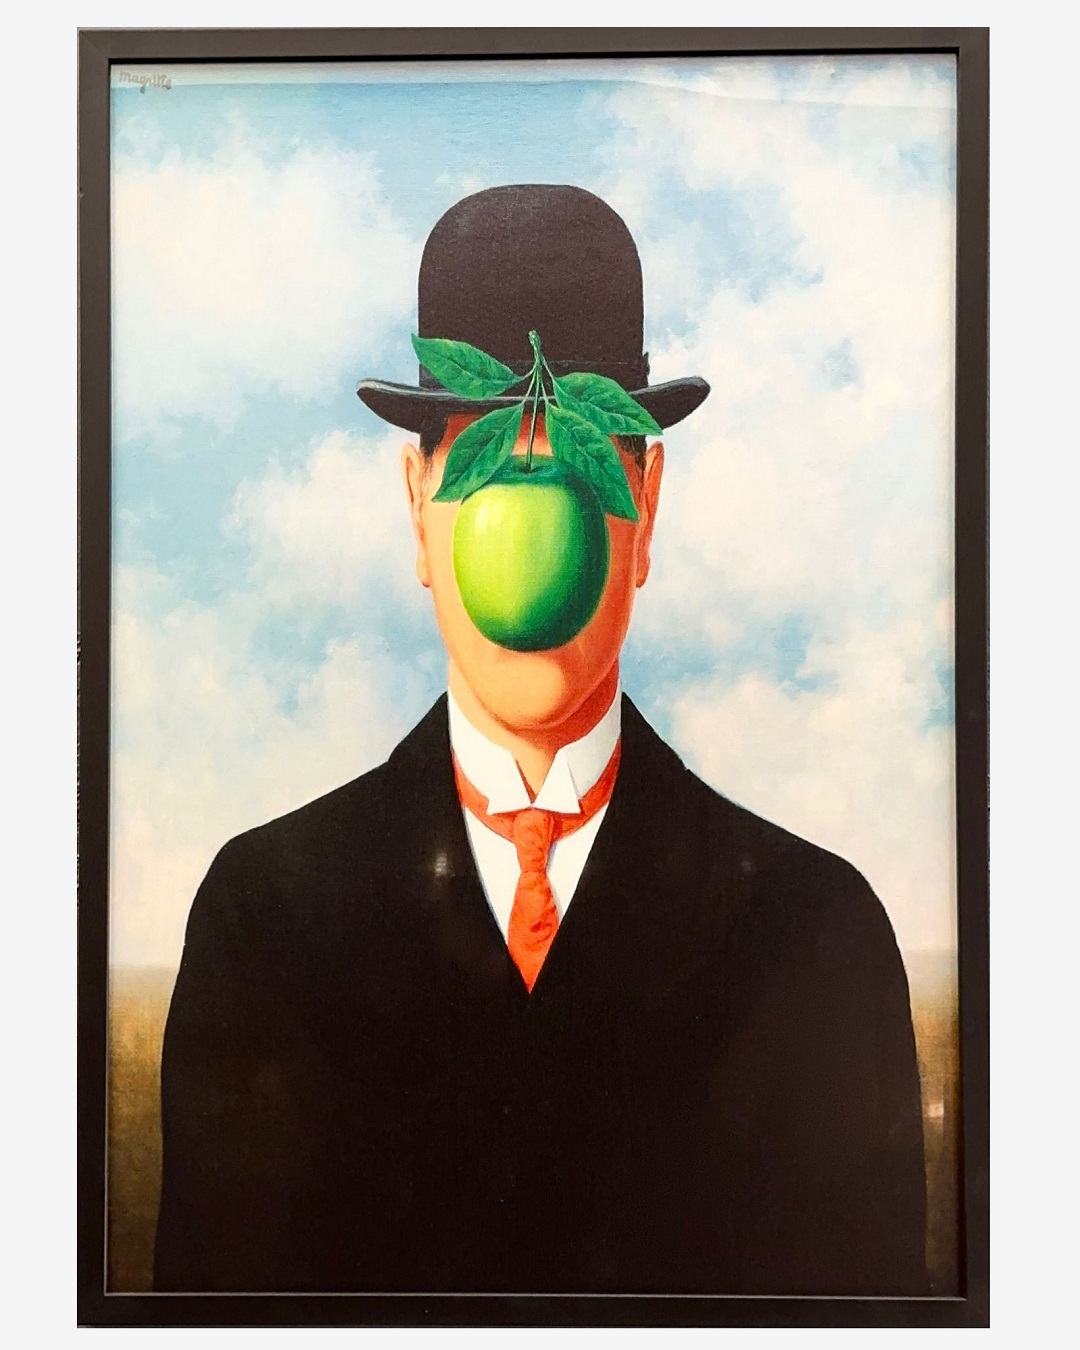 Framed Magritte art print. Man with apple in front of face